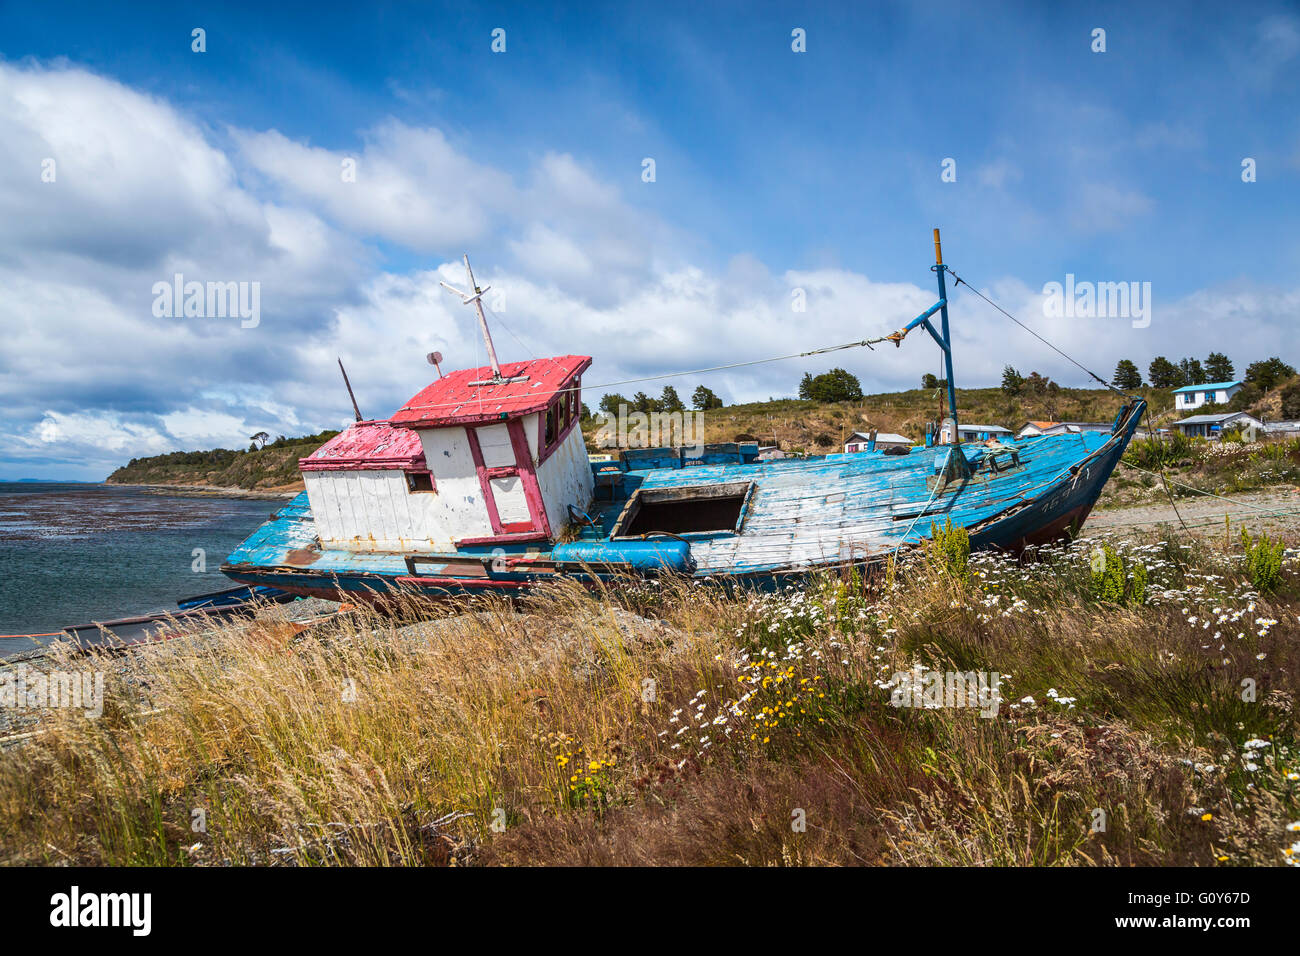 https://c8.alamy.com/comp/G0Y67D/old-fishing-boats-on-the-coast-on-the-strait-of-magellan-at-punta-G0Y67D.jpg